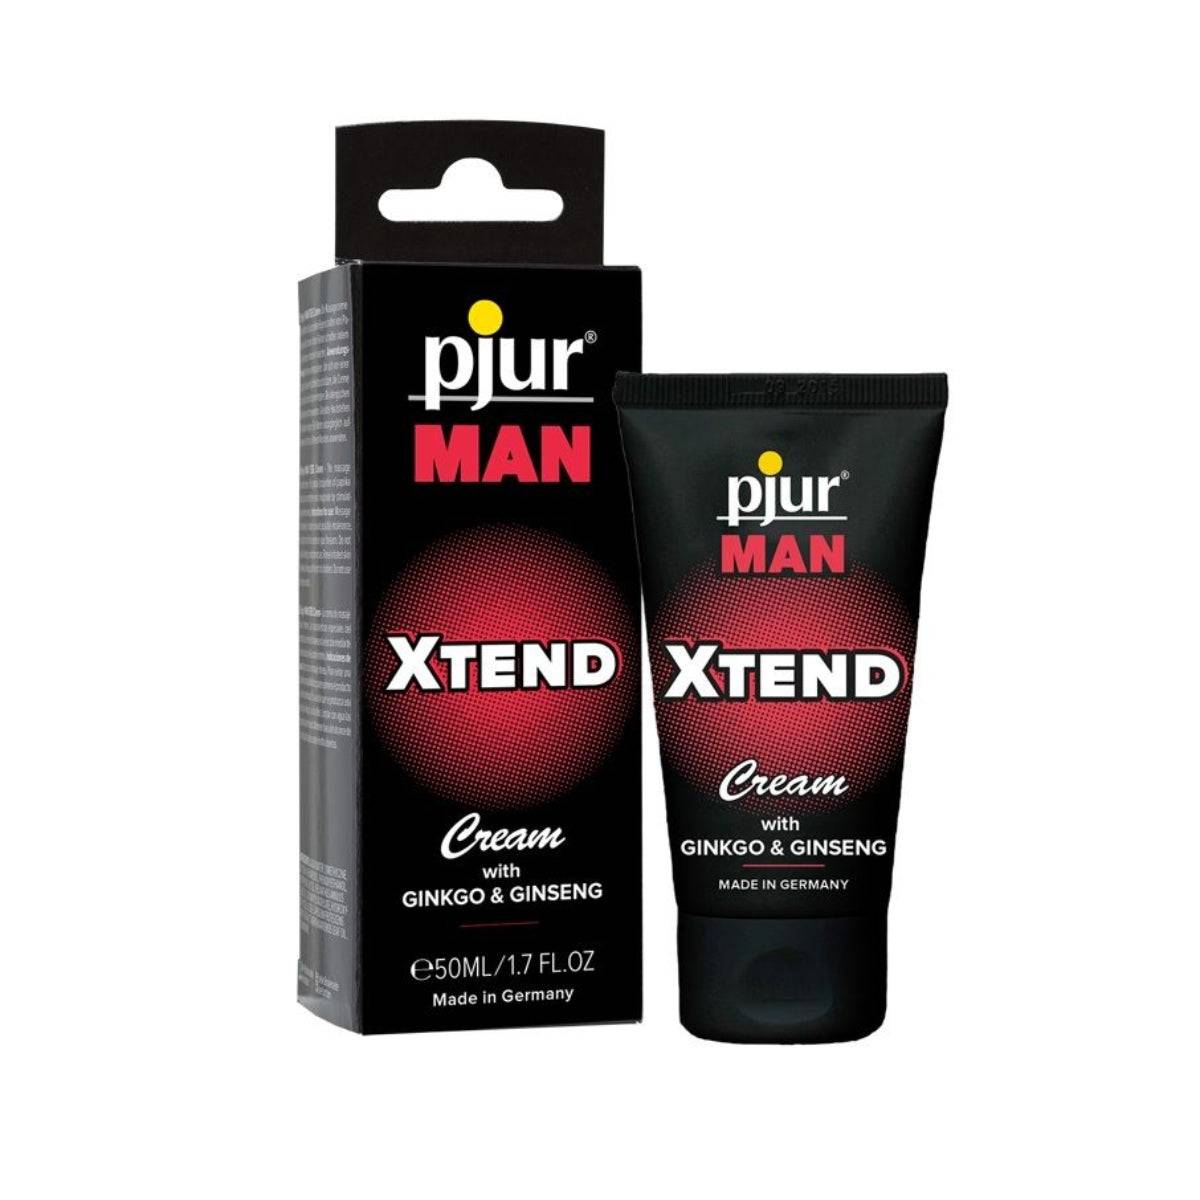 Front View Product And Packaging - Pjur Man Xtend Penis Cream in 50ml 